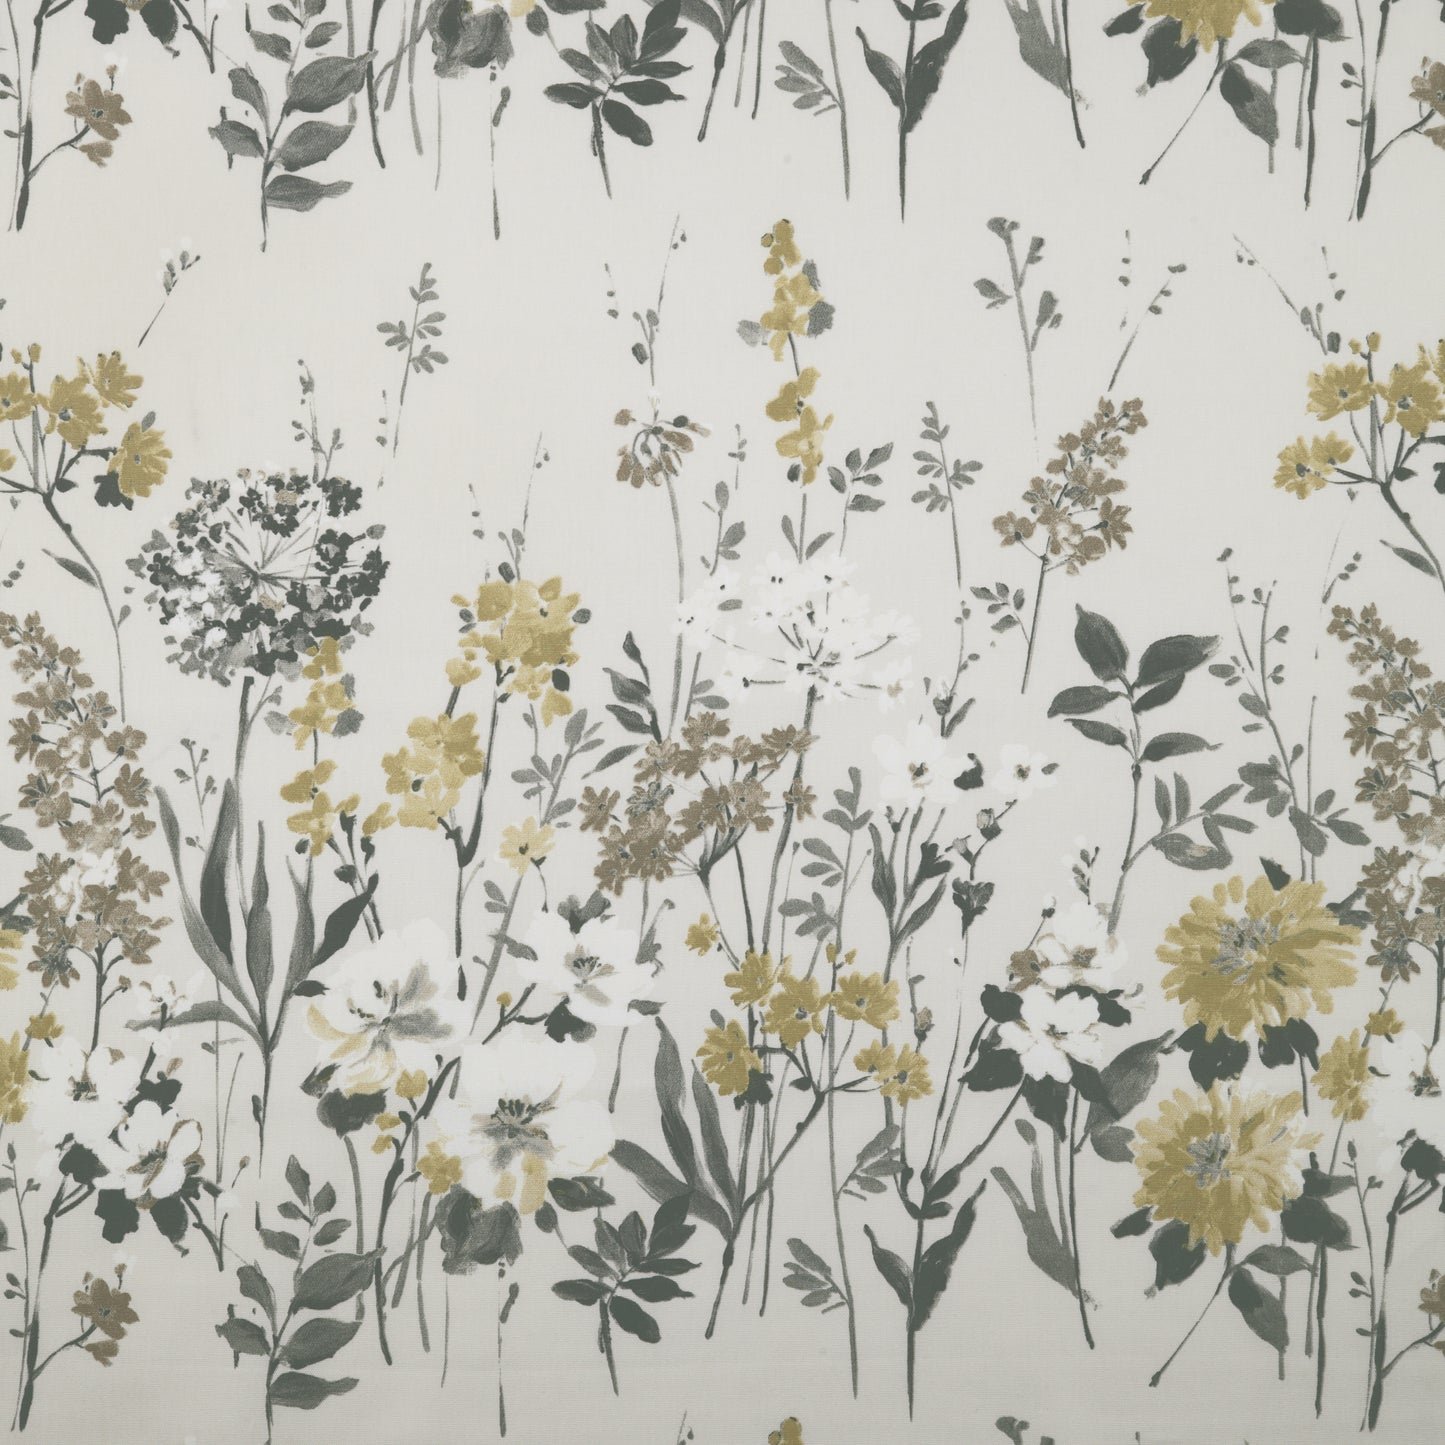 iLiv Wild Meadow Fabric in Charcoal